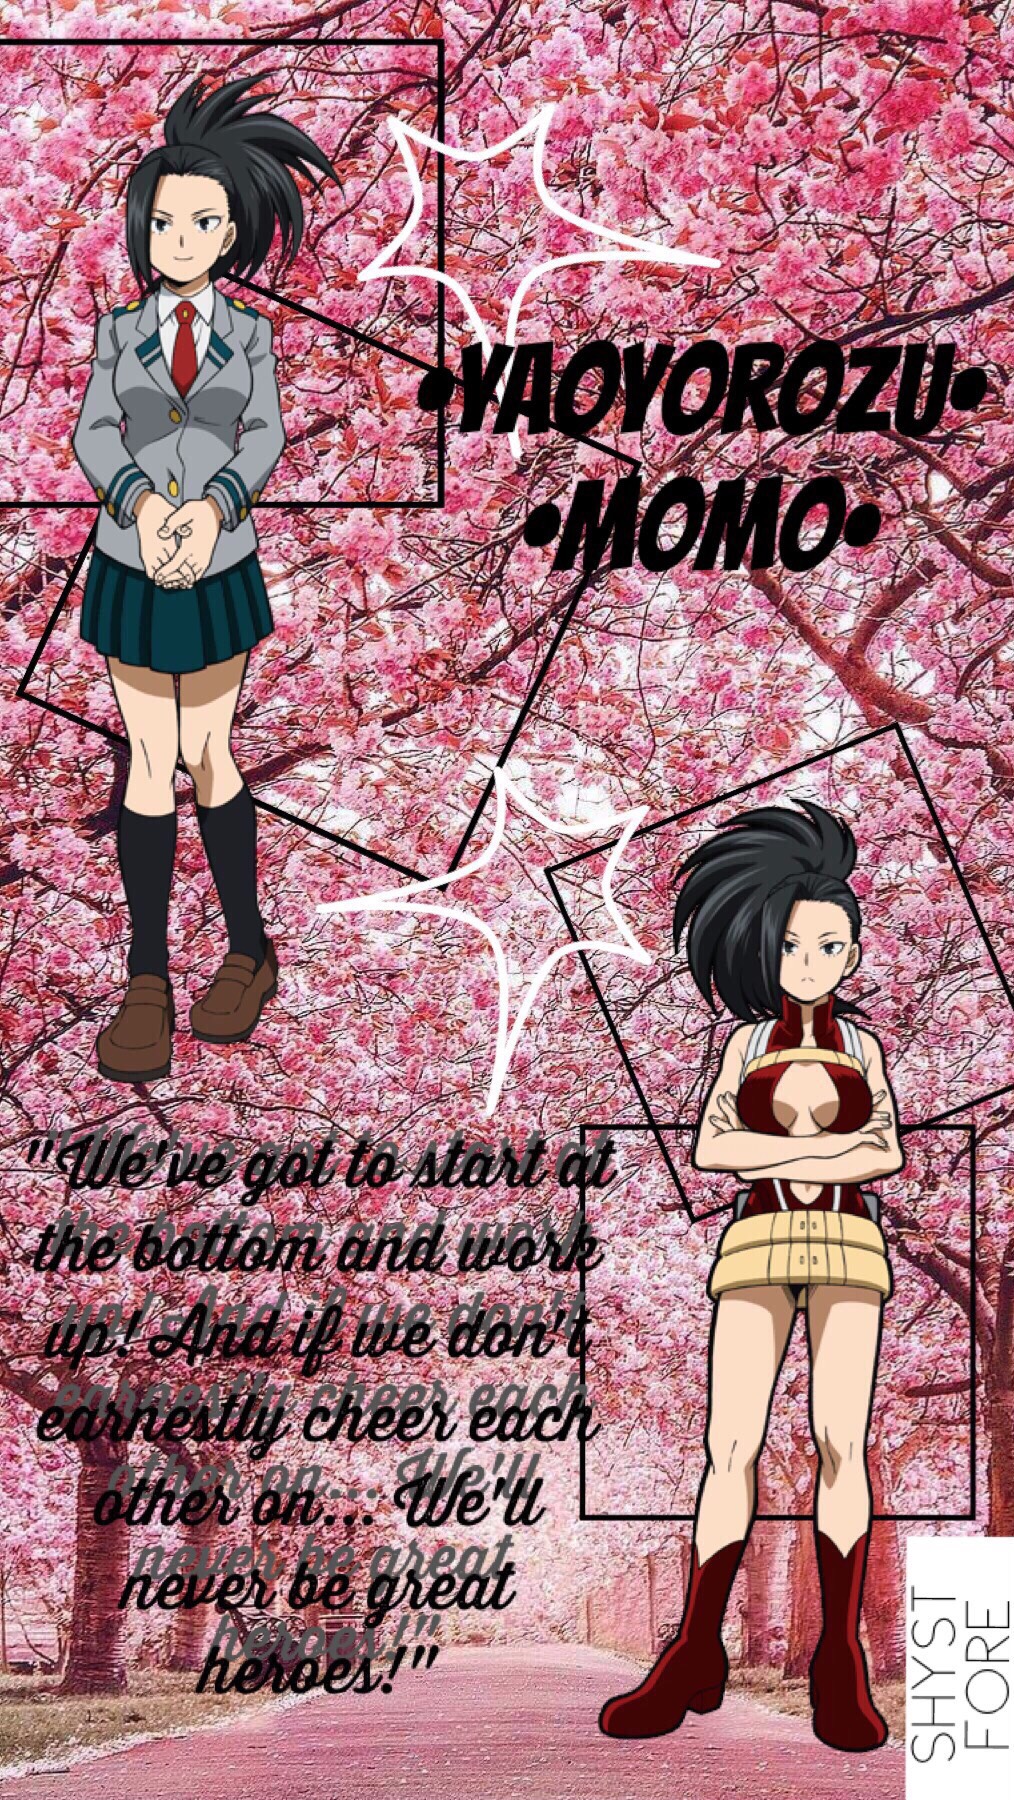 "We've got to start at the bottom and work up! And if we don't earnestly cheer each other on... We'll never be great heroes!" -Yaoyorozu Momo